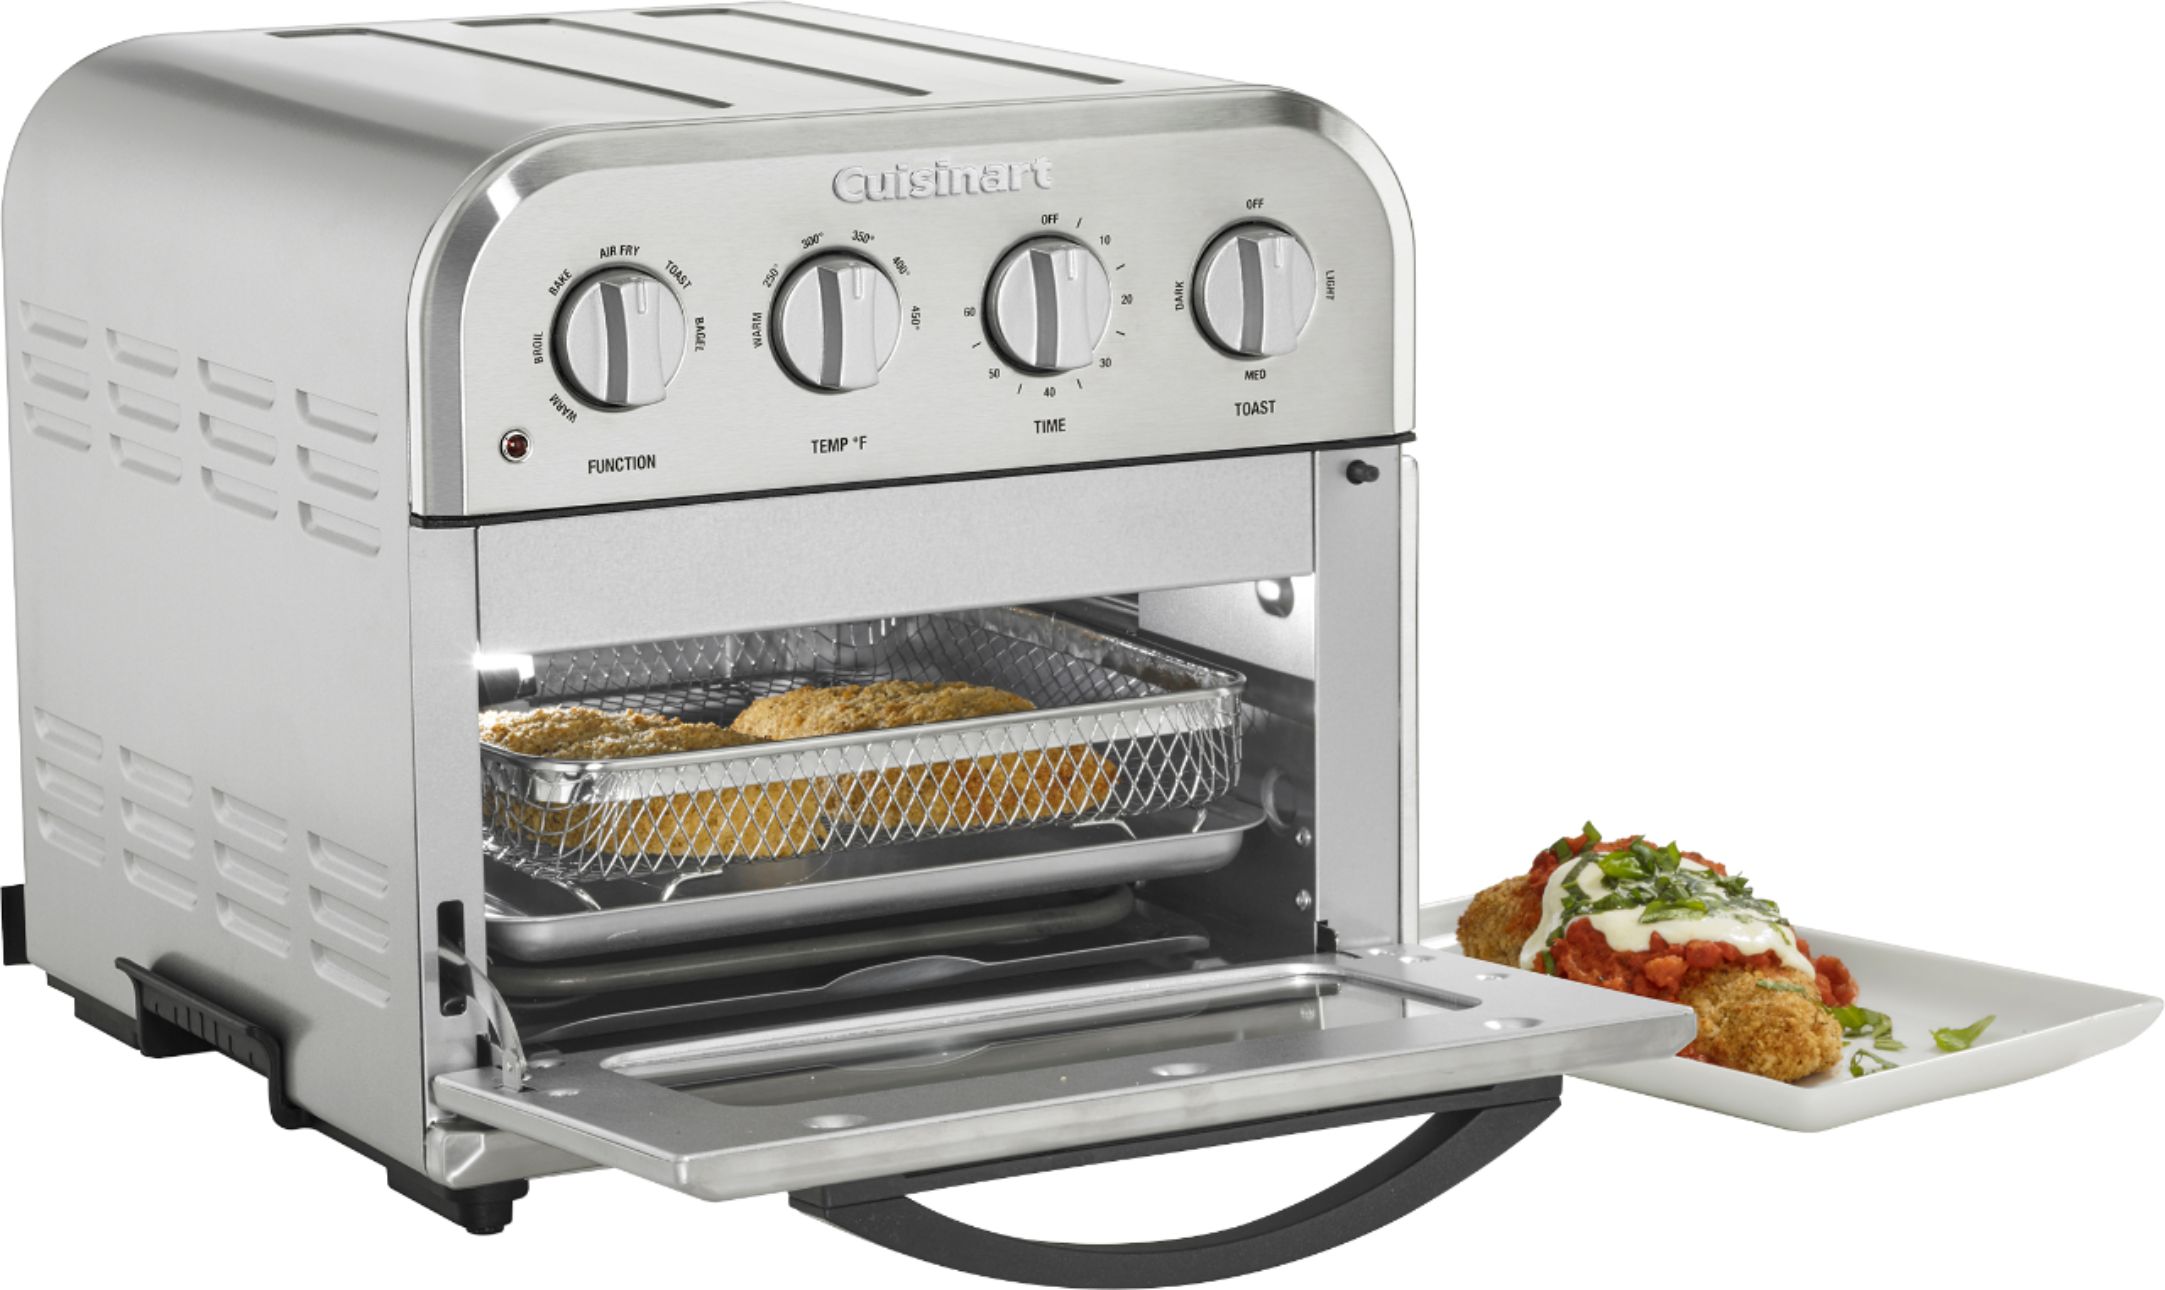 Air Fryer + Convection Toaster Oven by Cuisinart, 7-1 Oven with Bake,  Grill, Broil & Warm Options, Stainless Steel, TOA-60